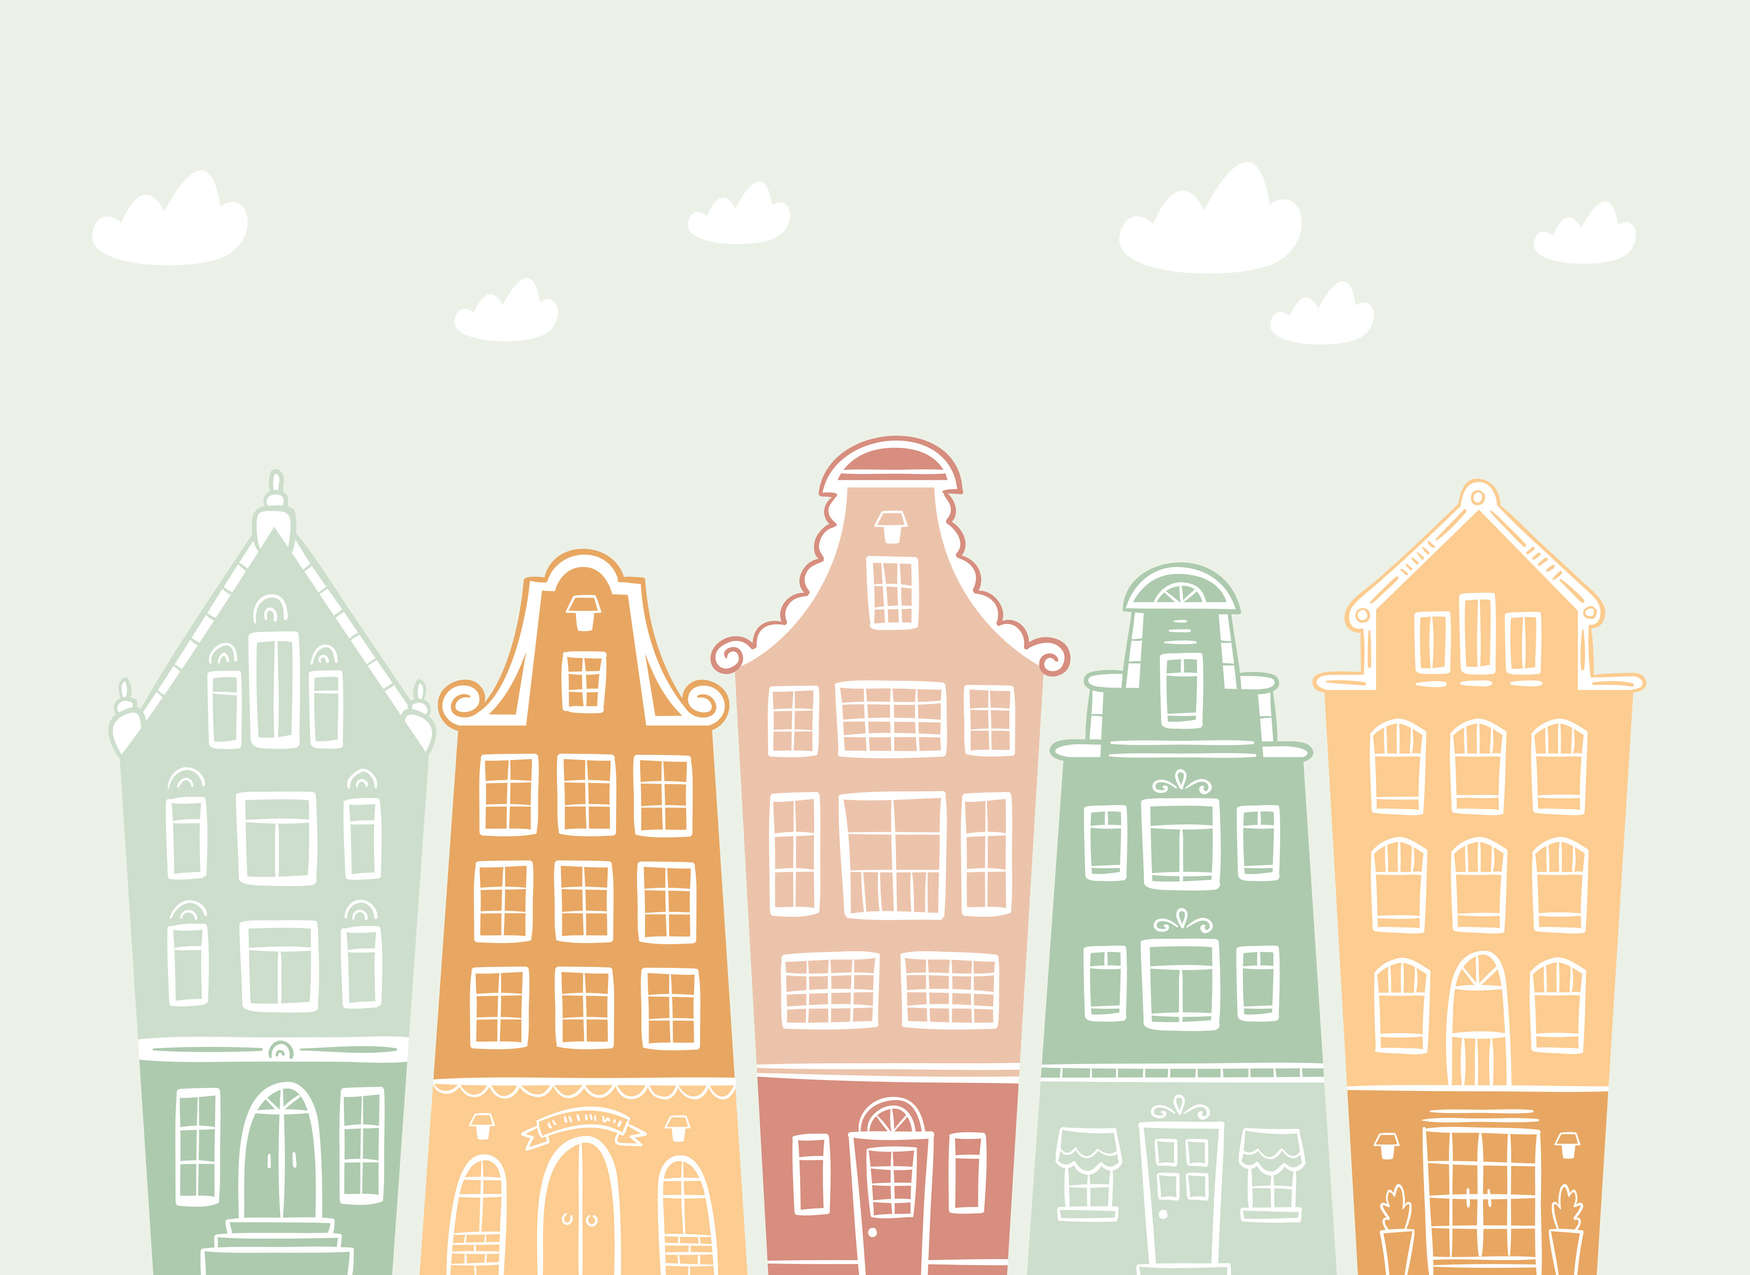             Nursery Small Town with Houses Wallpaper - Pastel, Colourful
        